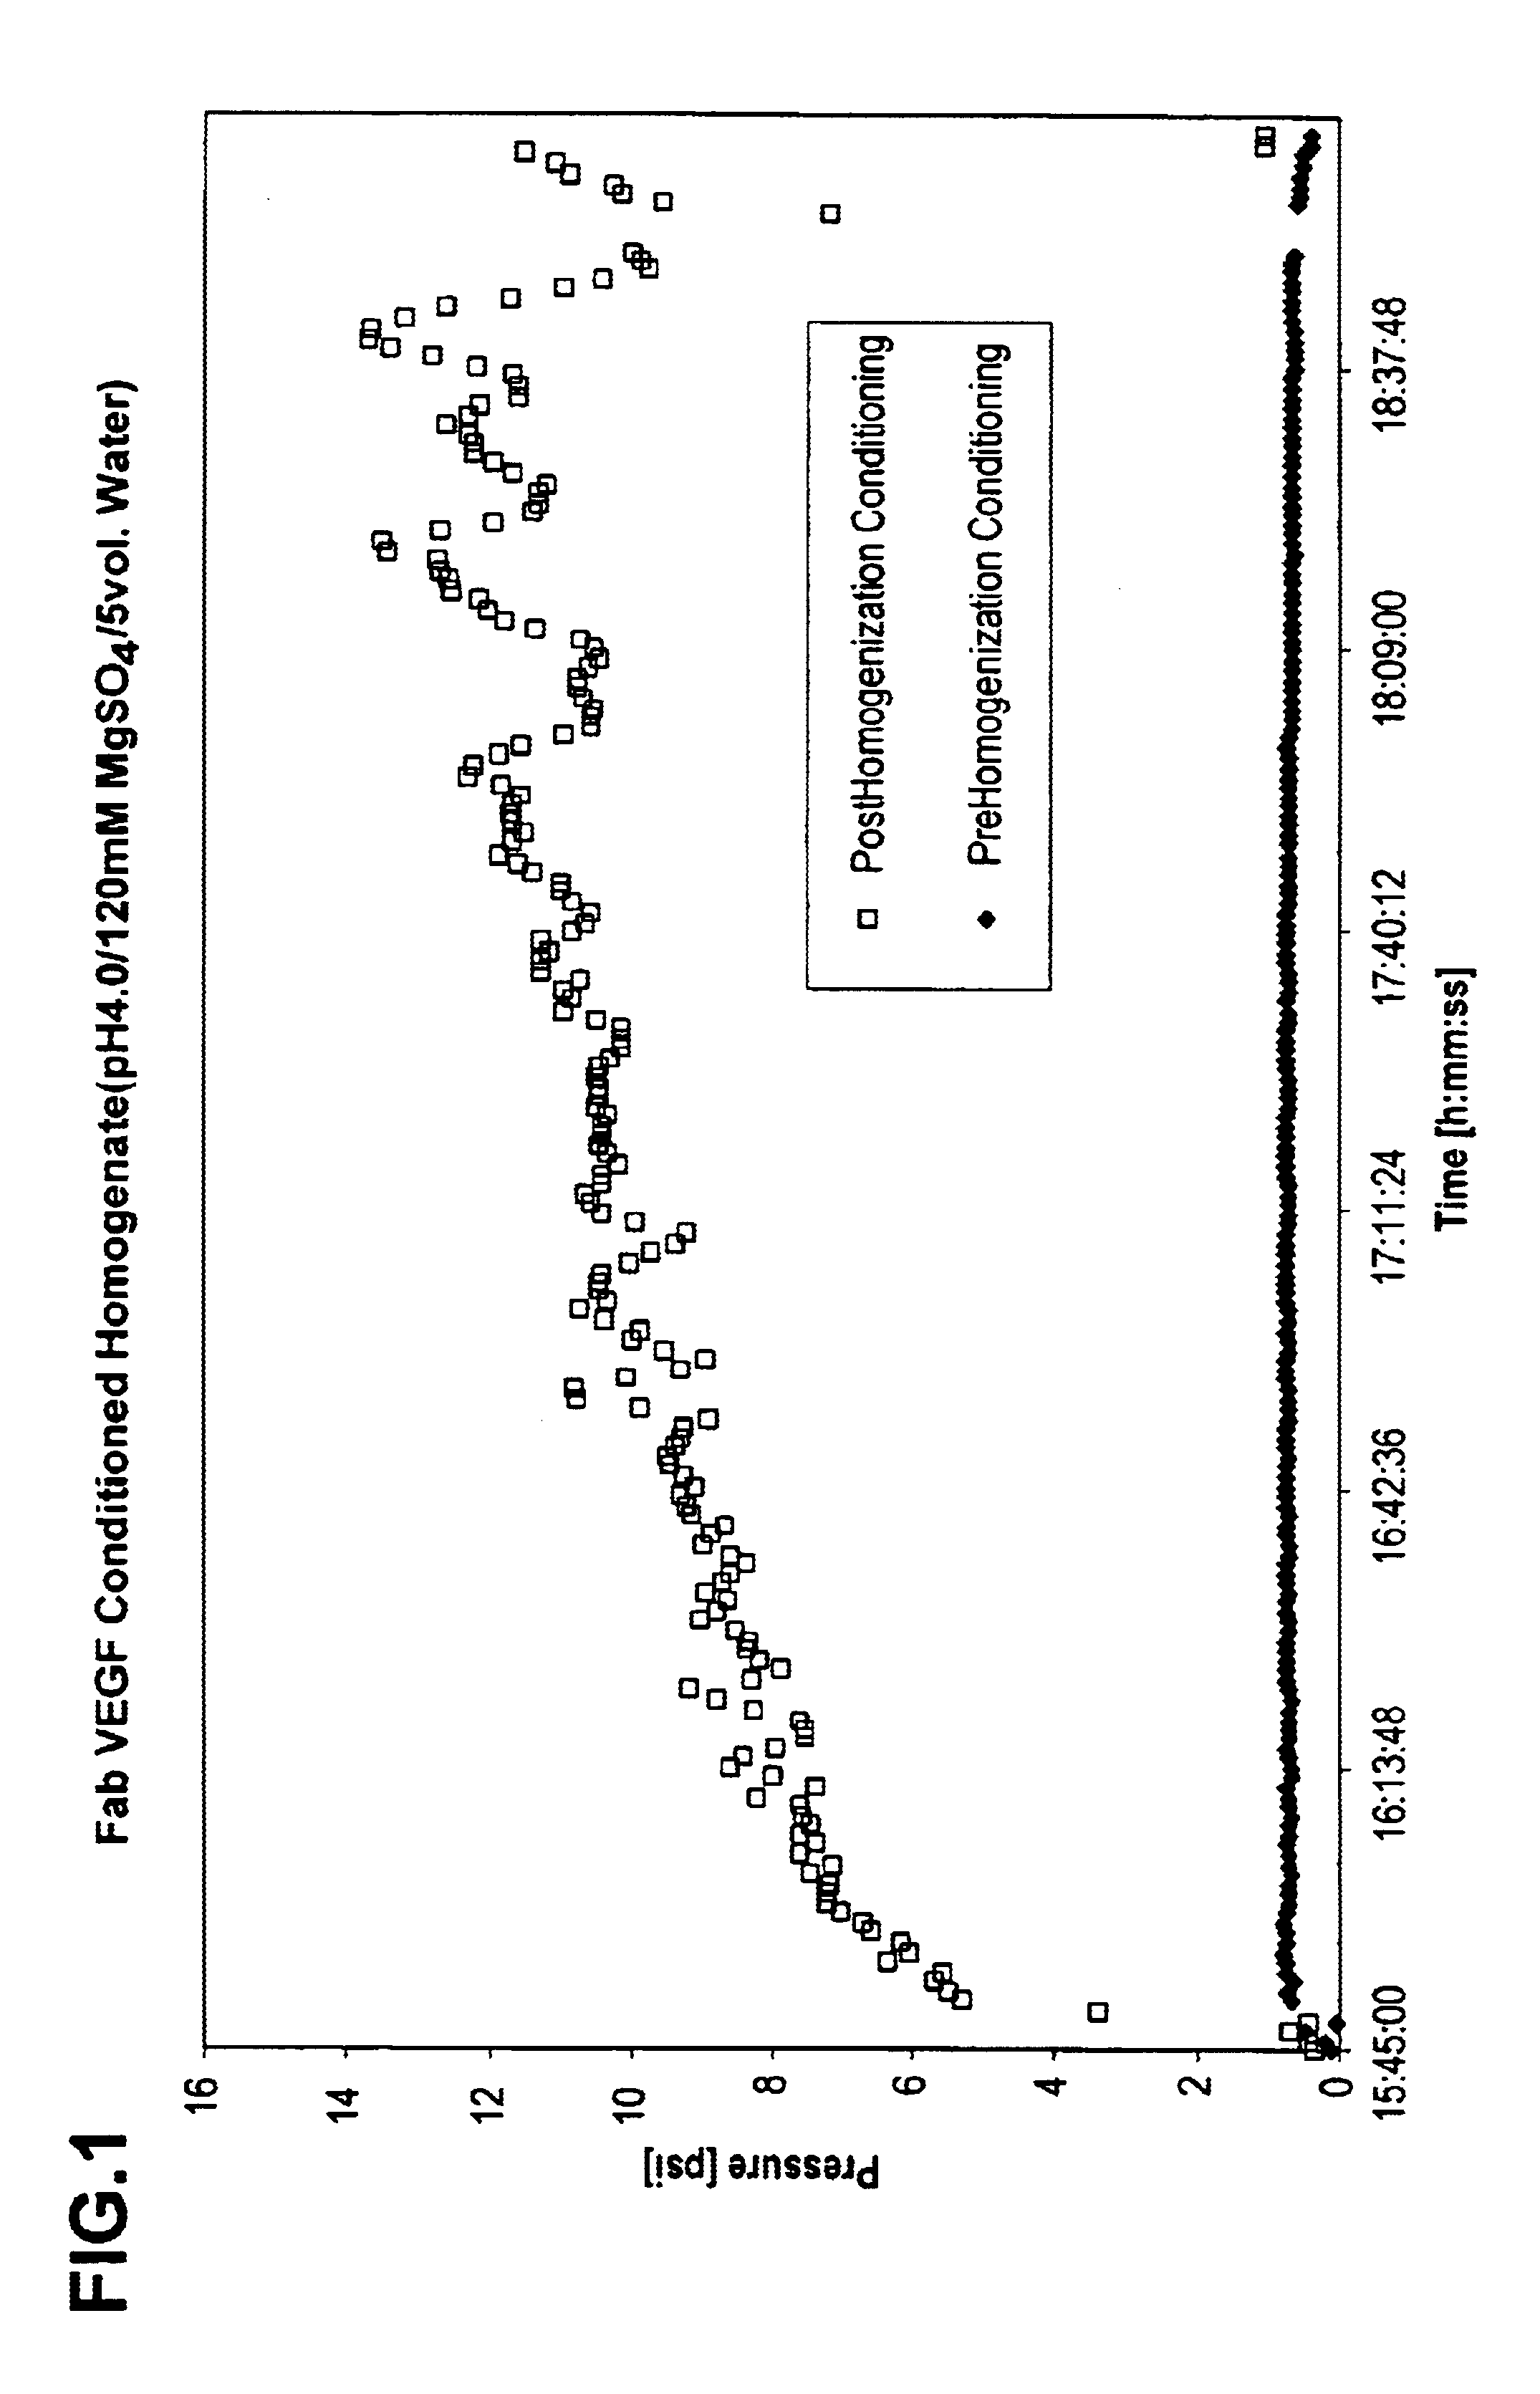 Process for protein extraction